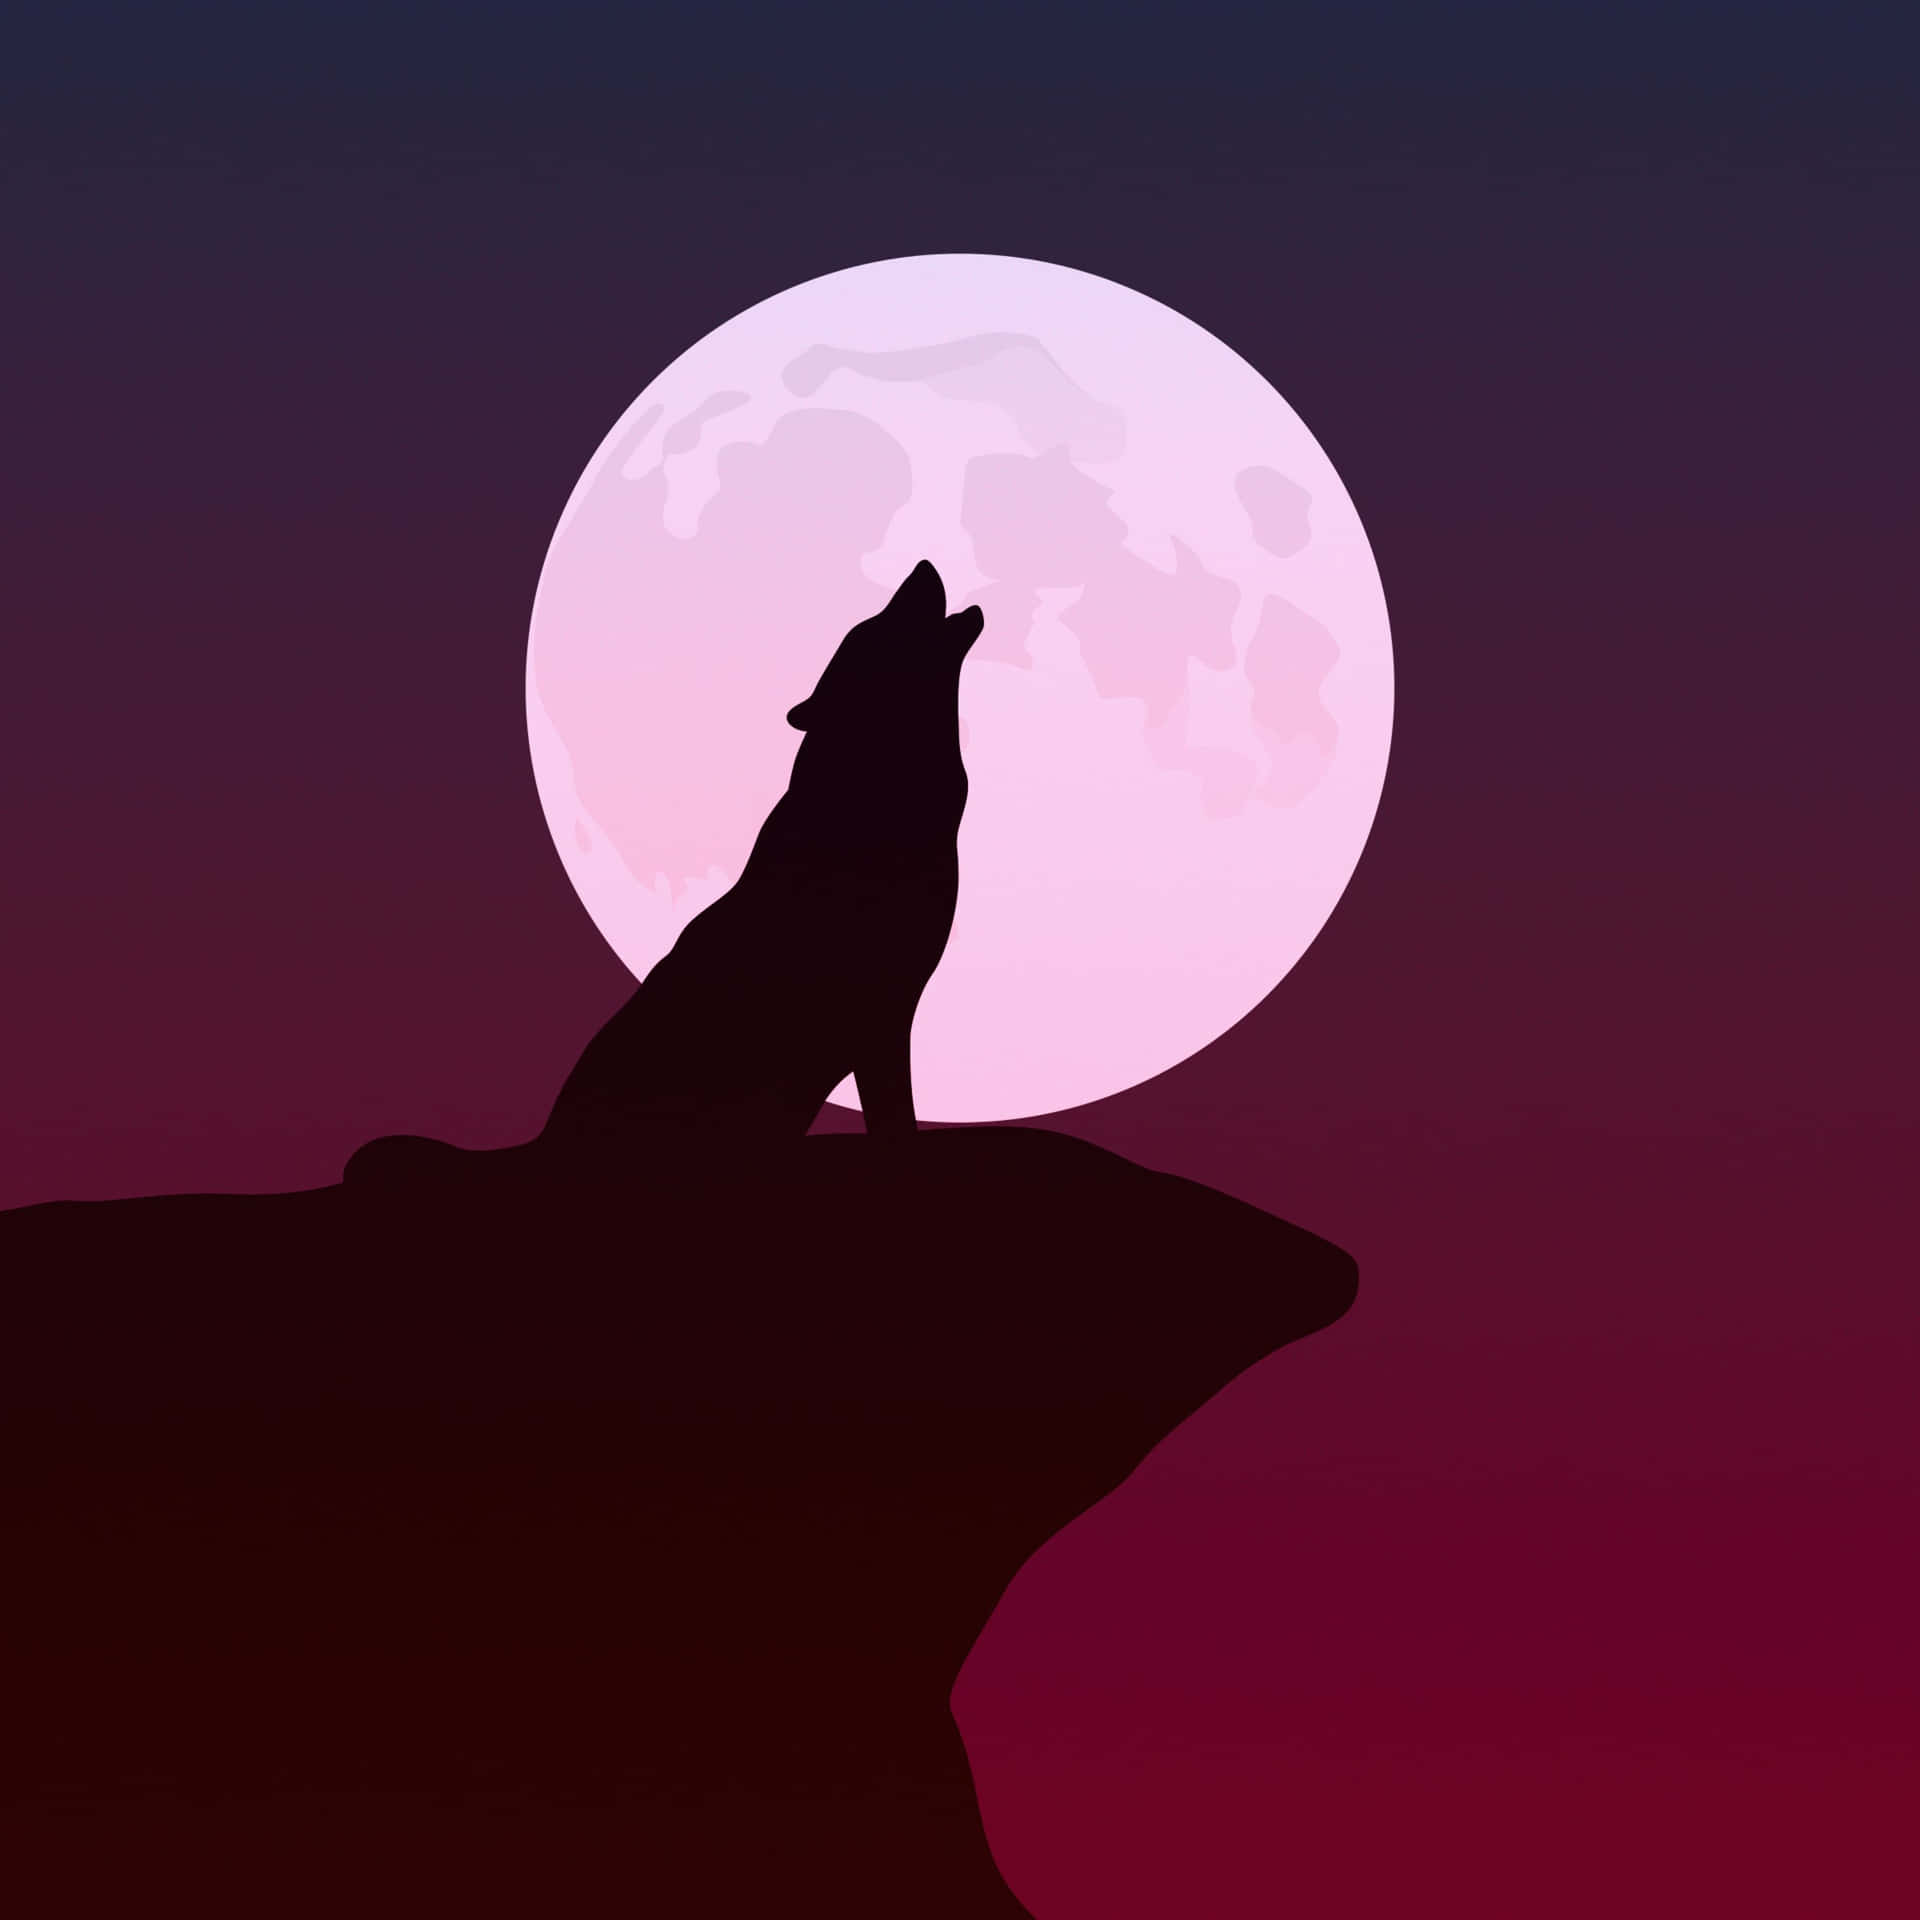 Majestic Howling Wolf Under the Full Moon Wallpaper